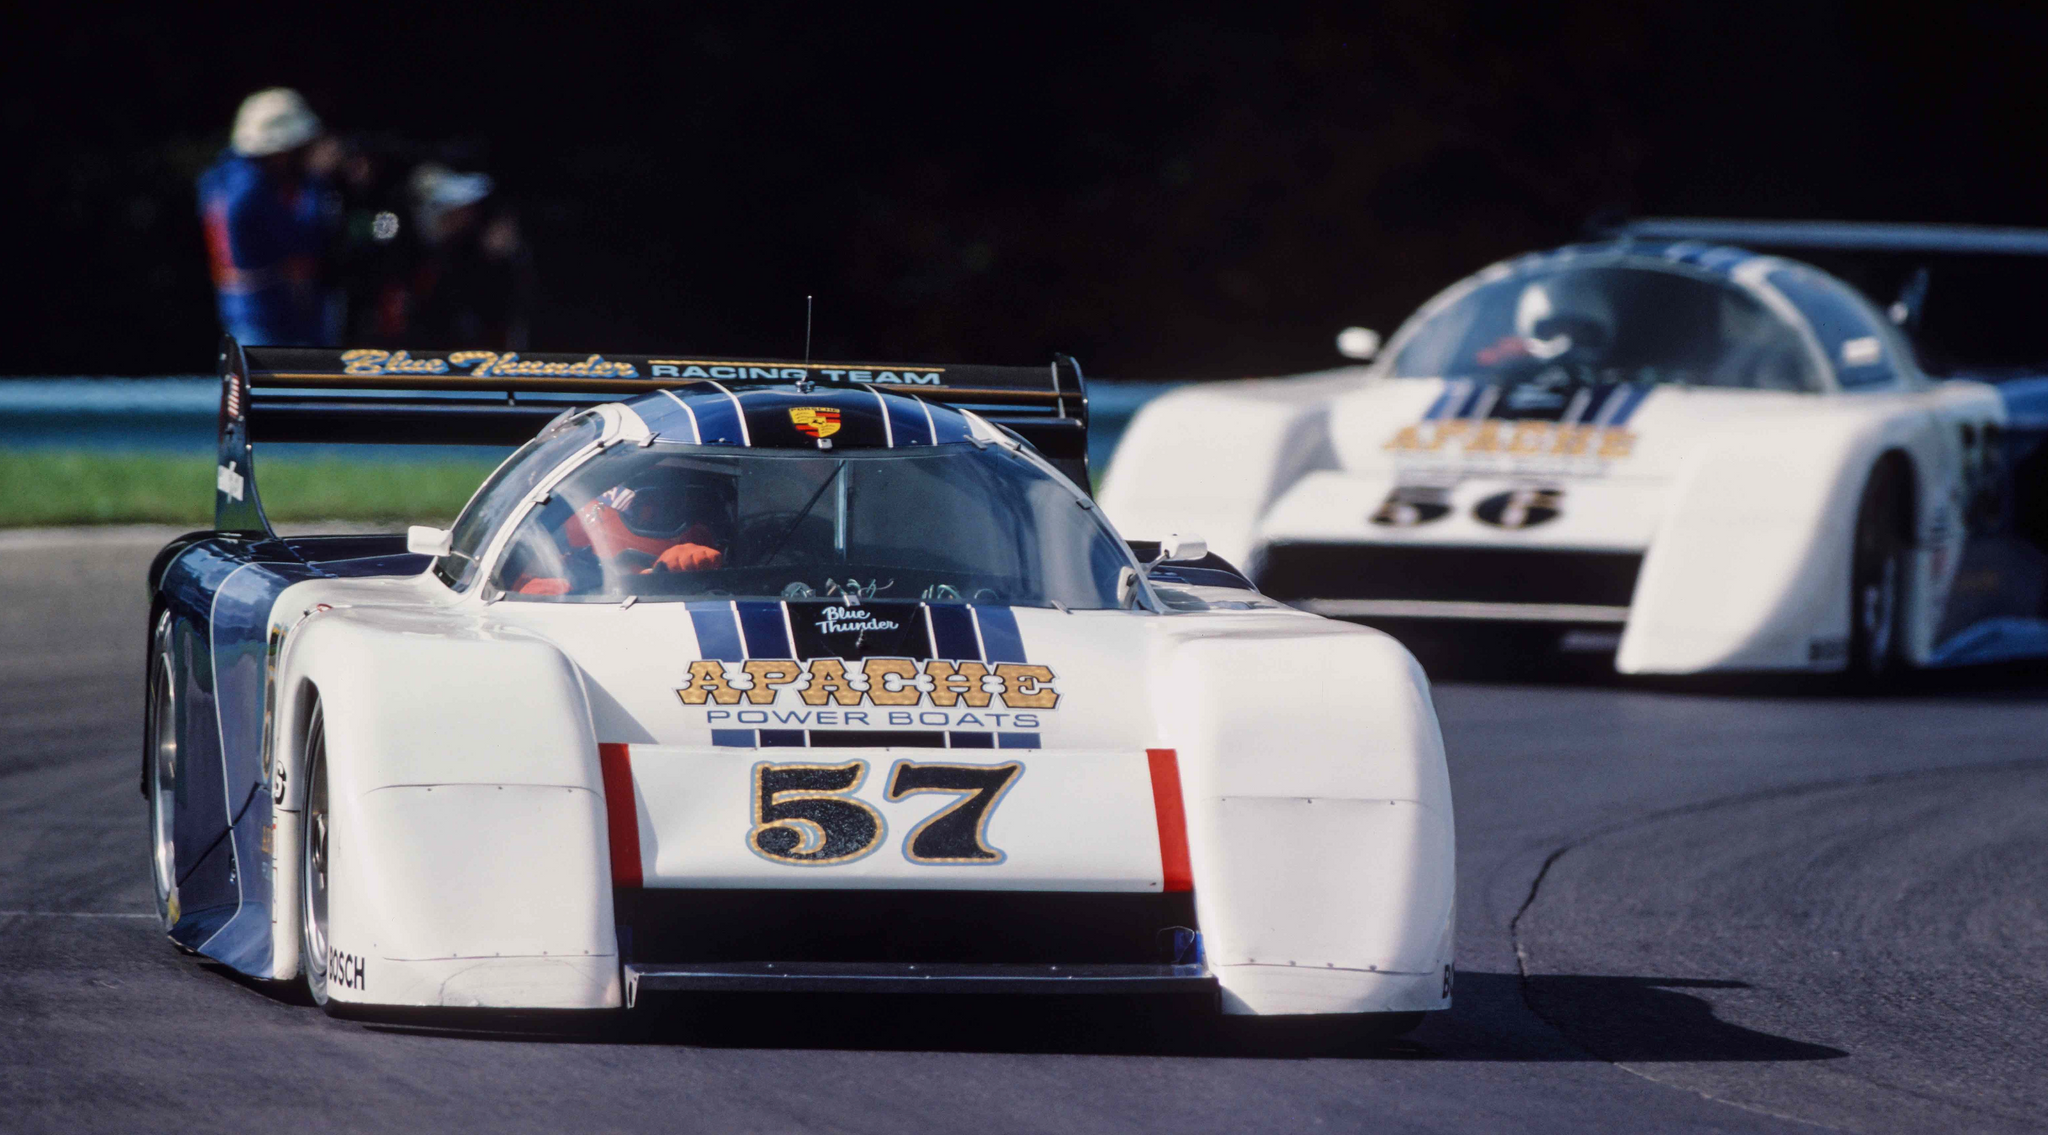 Reliving the Thrill A Deep Dive into the 1984 IMSA GP of Miami